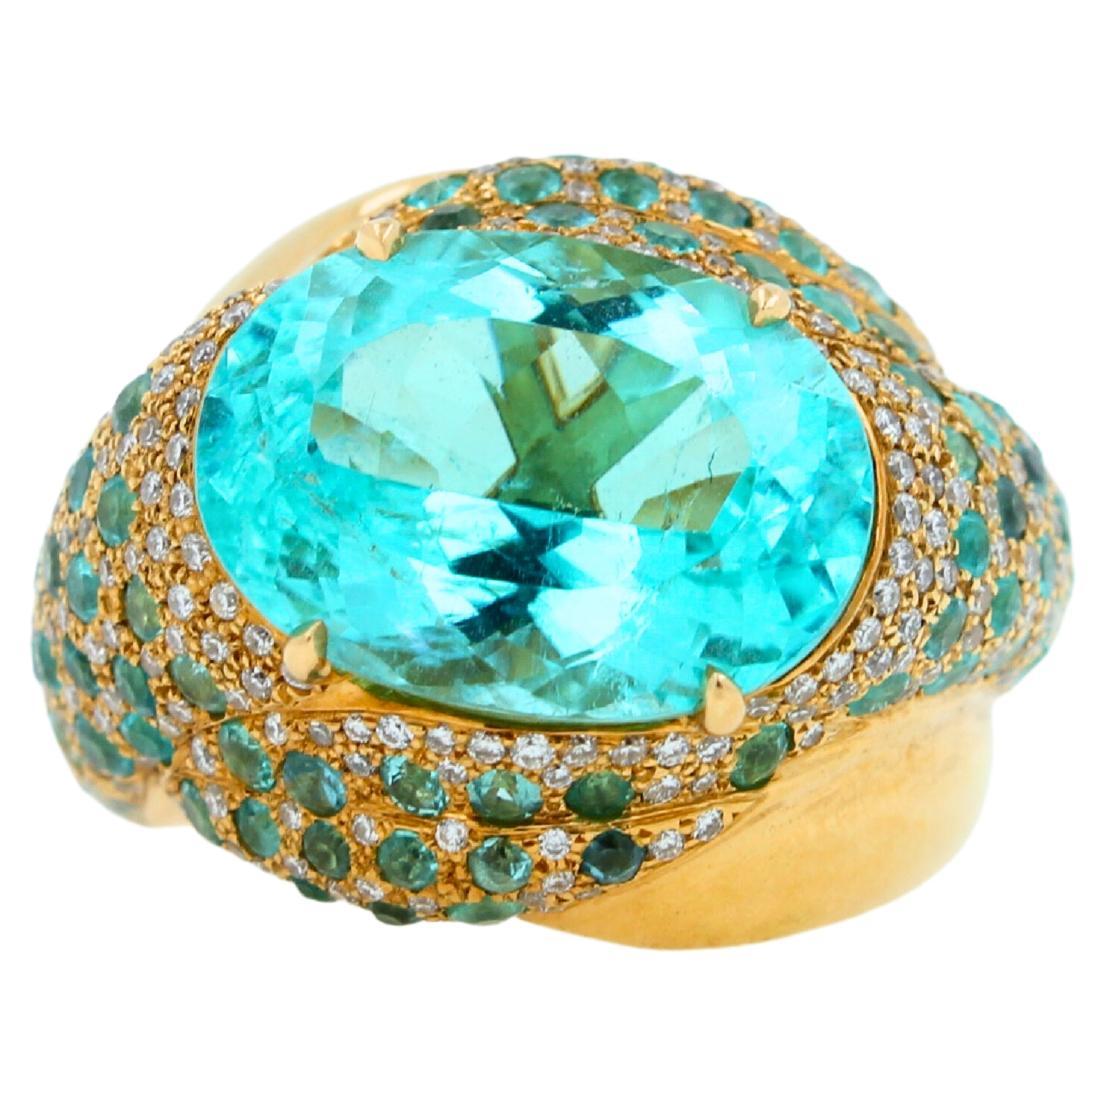 9 Carats Genuine Paraiba Tourmaline
Oval-Shape Brilliant Cut Form
16mm length of gemstone
12mm width of gemstone
Diamonds 0.65 ctw G VS
Pave Paraiba Tourmaline: 1.00 ctw
18K Yellow Gold
20.58 grams
Ring Size 7 
4.5 mm back shank width
21.0 mm front